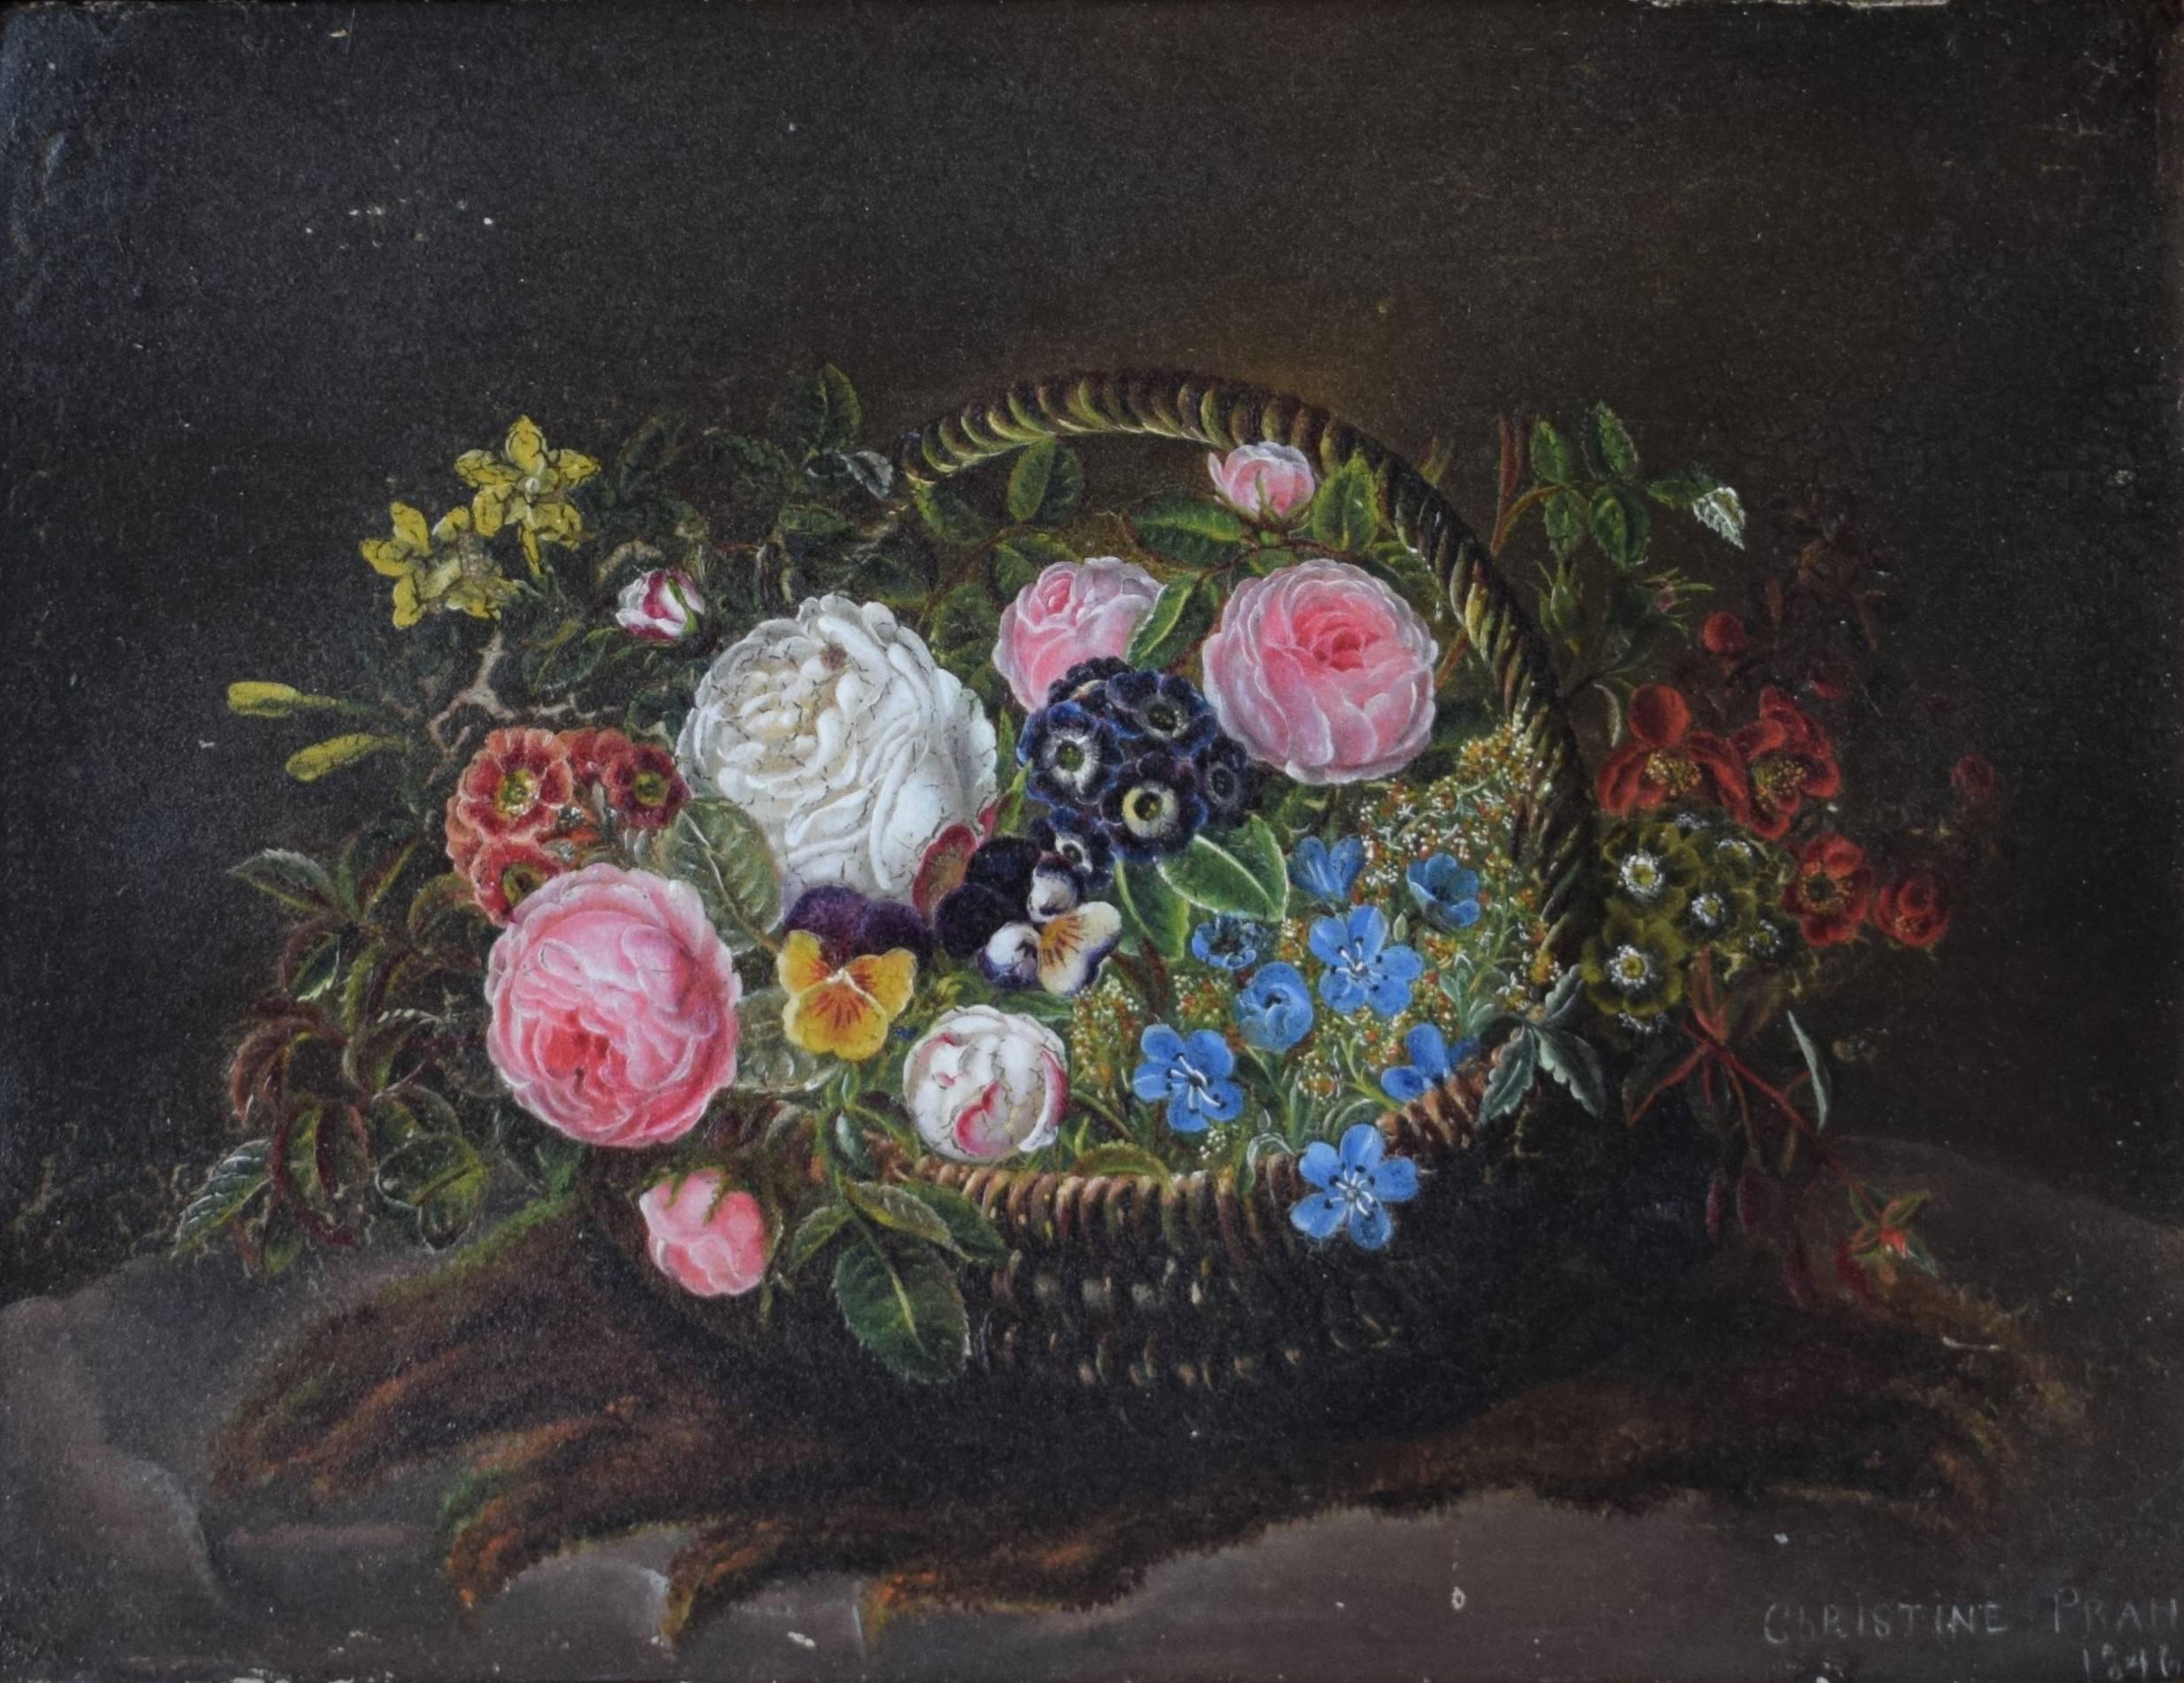 Still-life with flowers in a basket by the Danish painter Christine Prahl. In the school of I.L. Jensen.
Signed: Christine Prahl 1846, oil on panel.
Dimensions:
In 9.1 H x in 10.6 W x in 1.2 D / cm 23 H x cm 27 W x cm 3 D.
(In 5.12 H x in 6.7 W